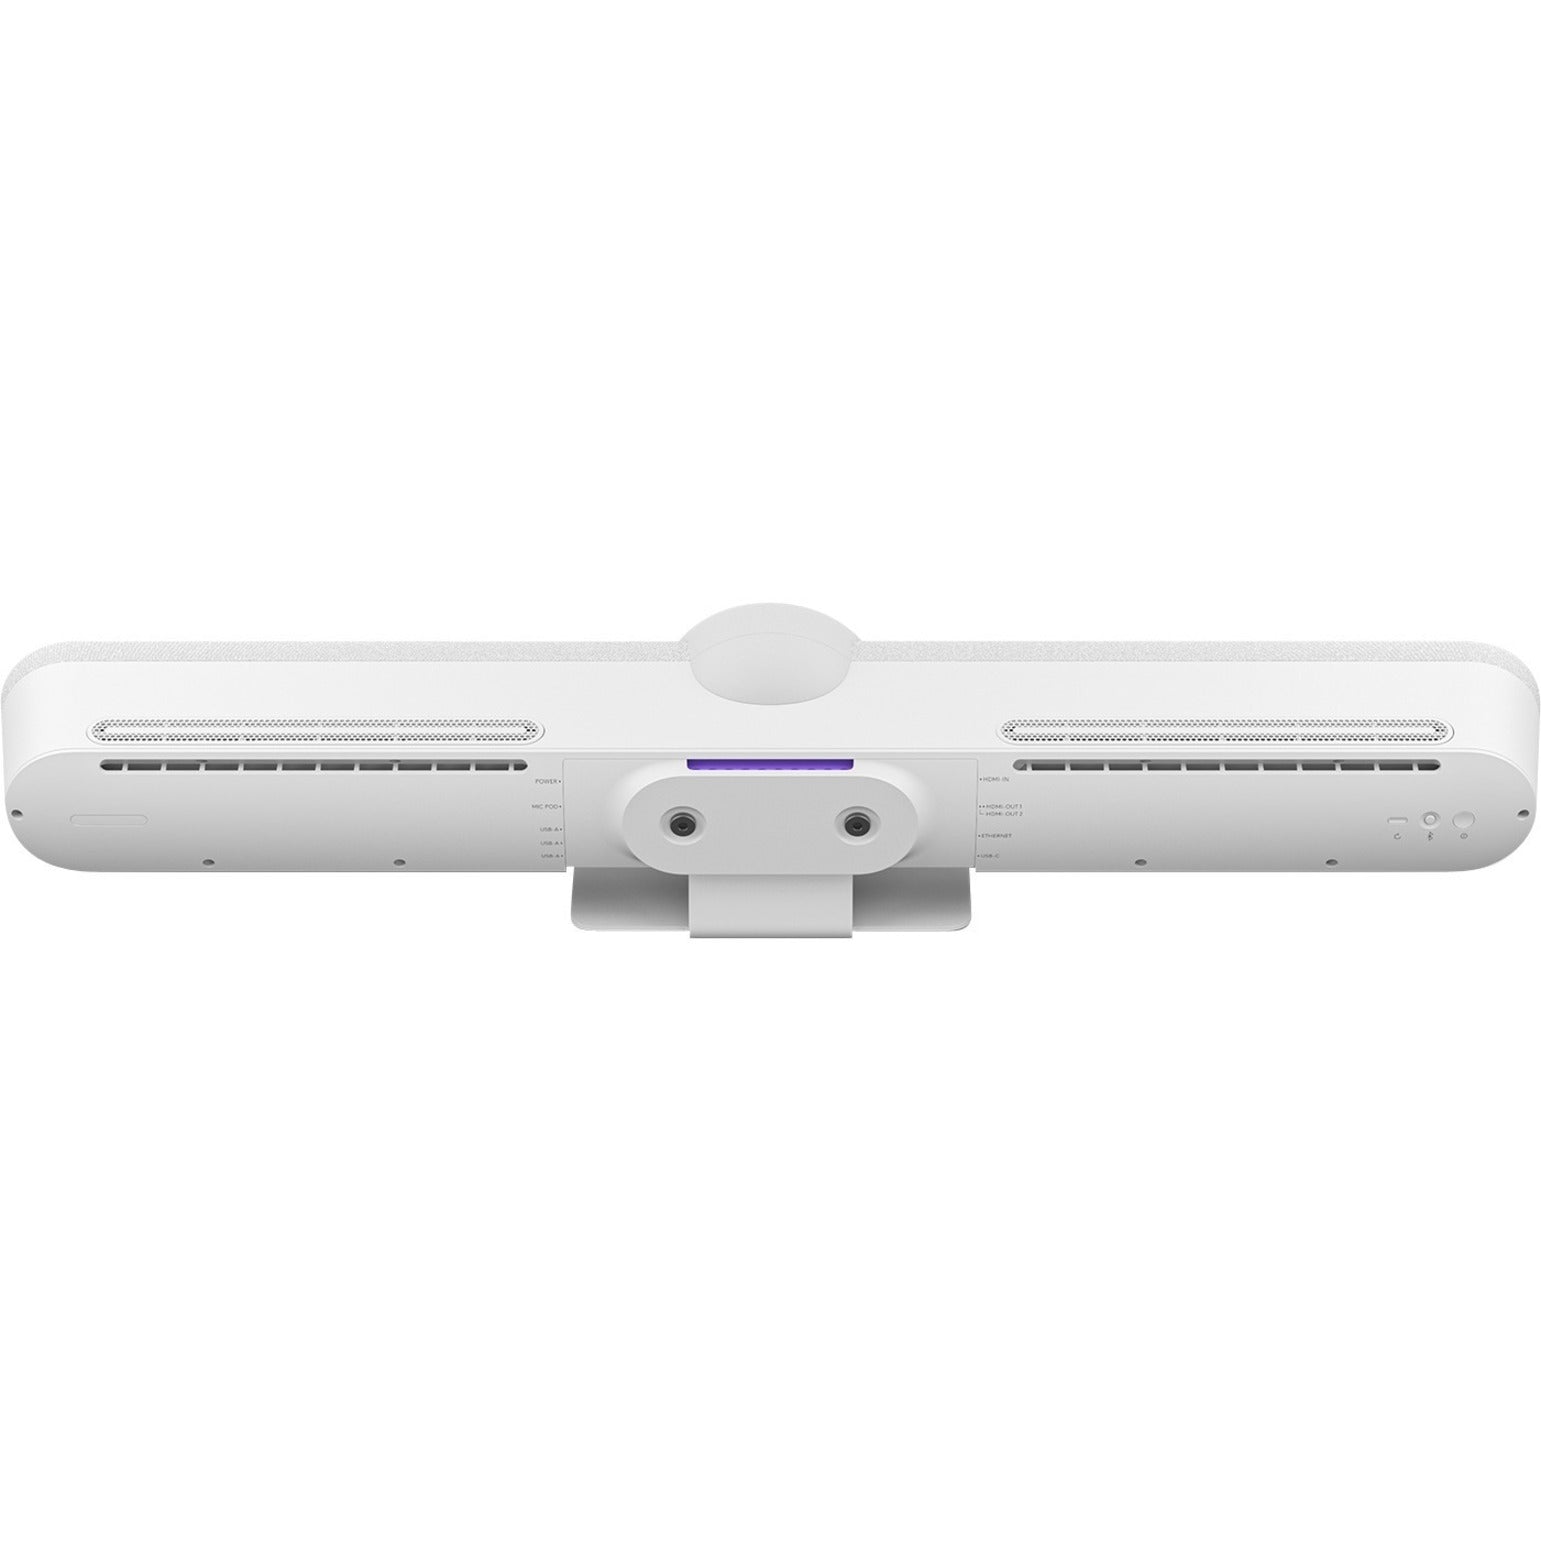 Logitech 960-001348 Rally Bar Mini - White, Video Conferencing Camera, 4x Digital Zoom, 2 Year Limited Warranty